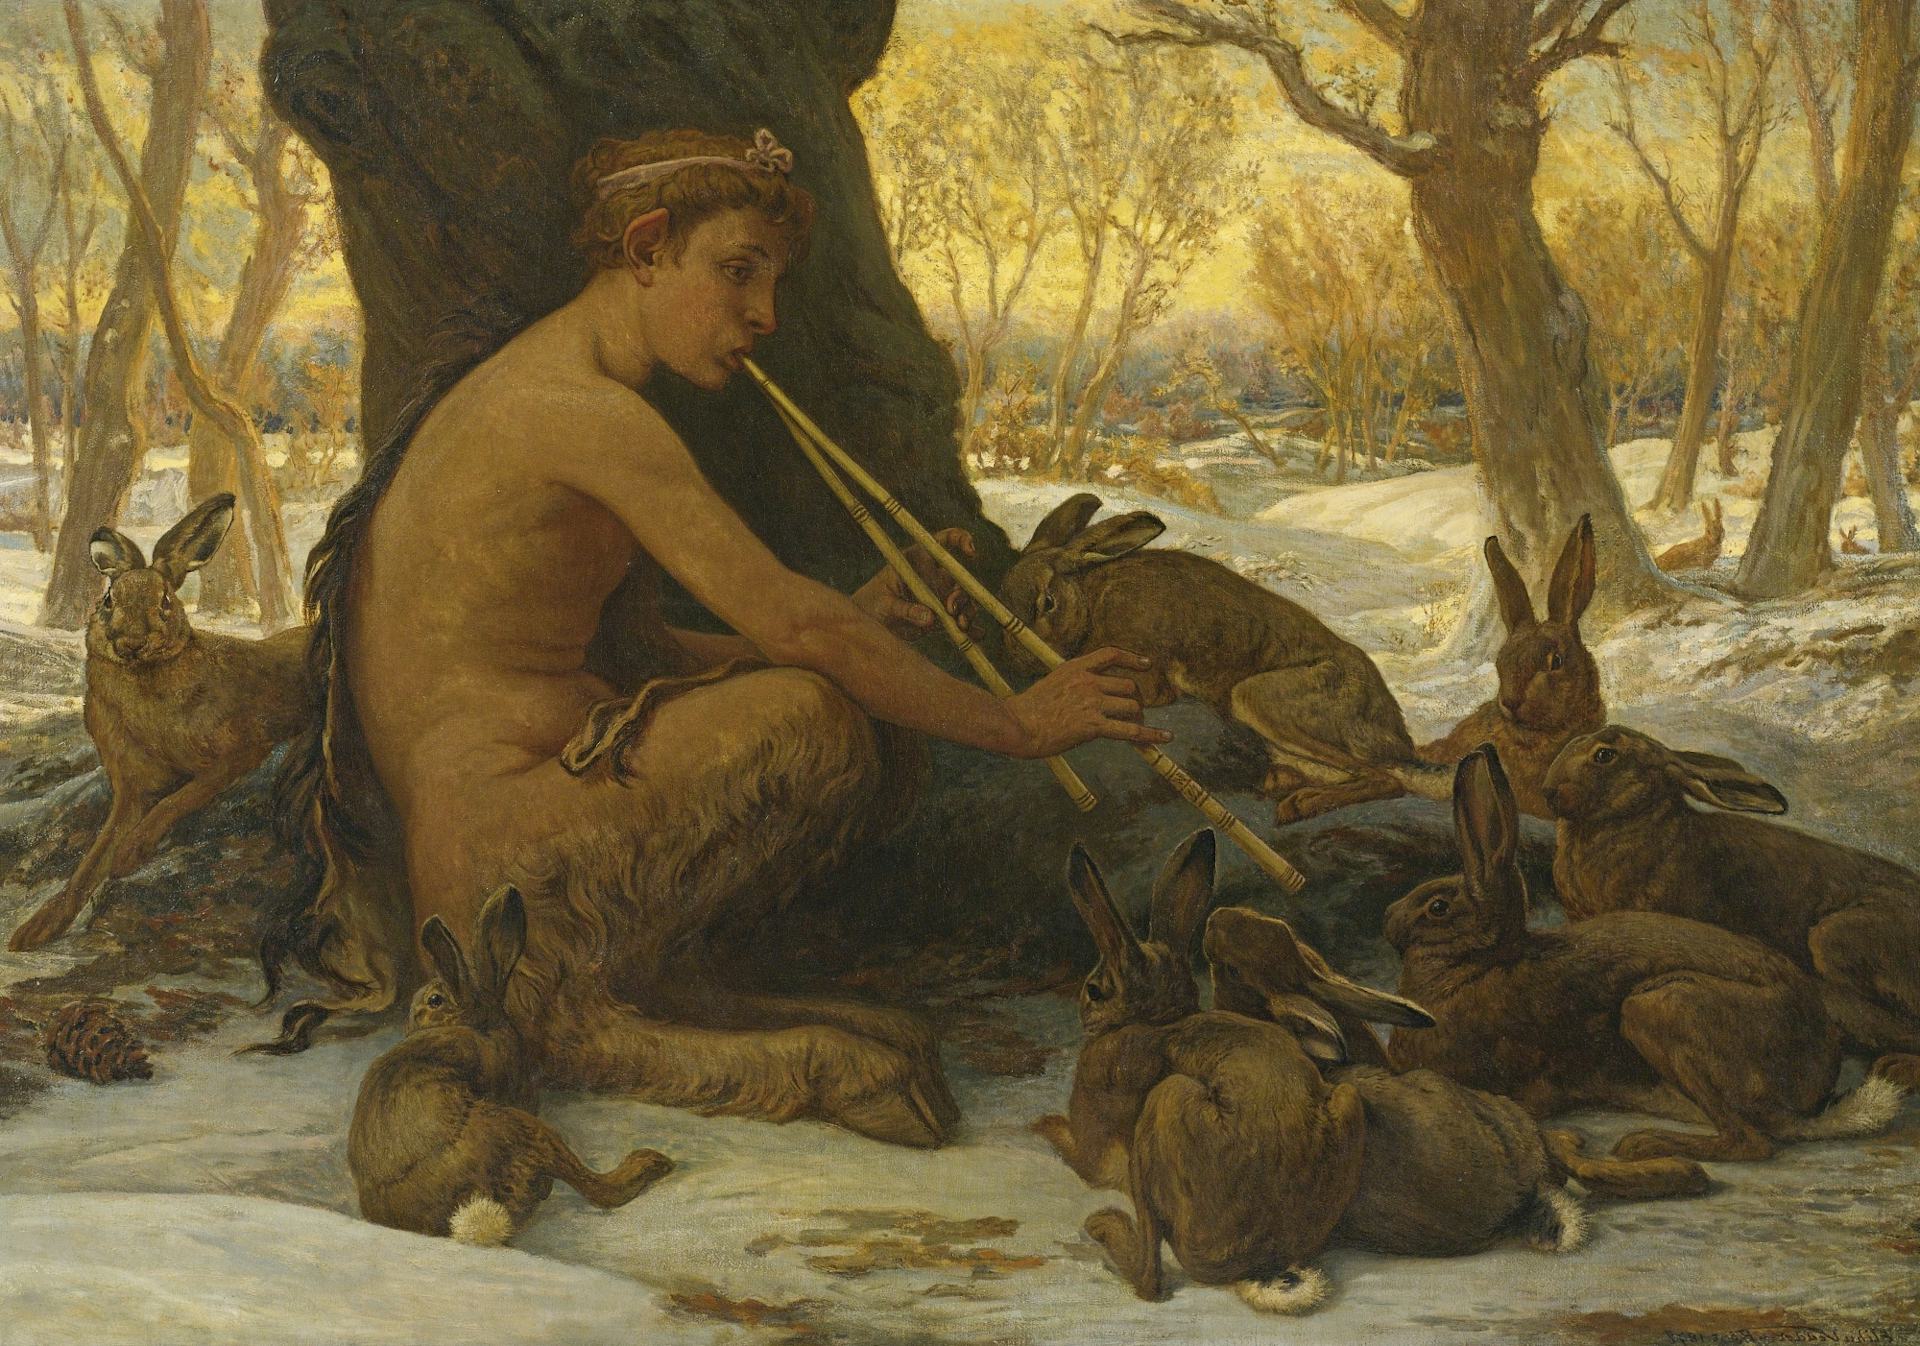 The Young Marsyas Charming the Hares by Elihu Vedder (1878)